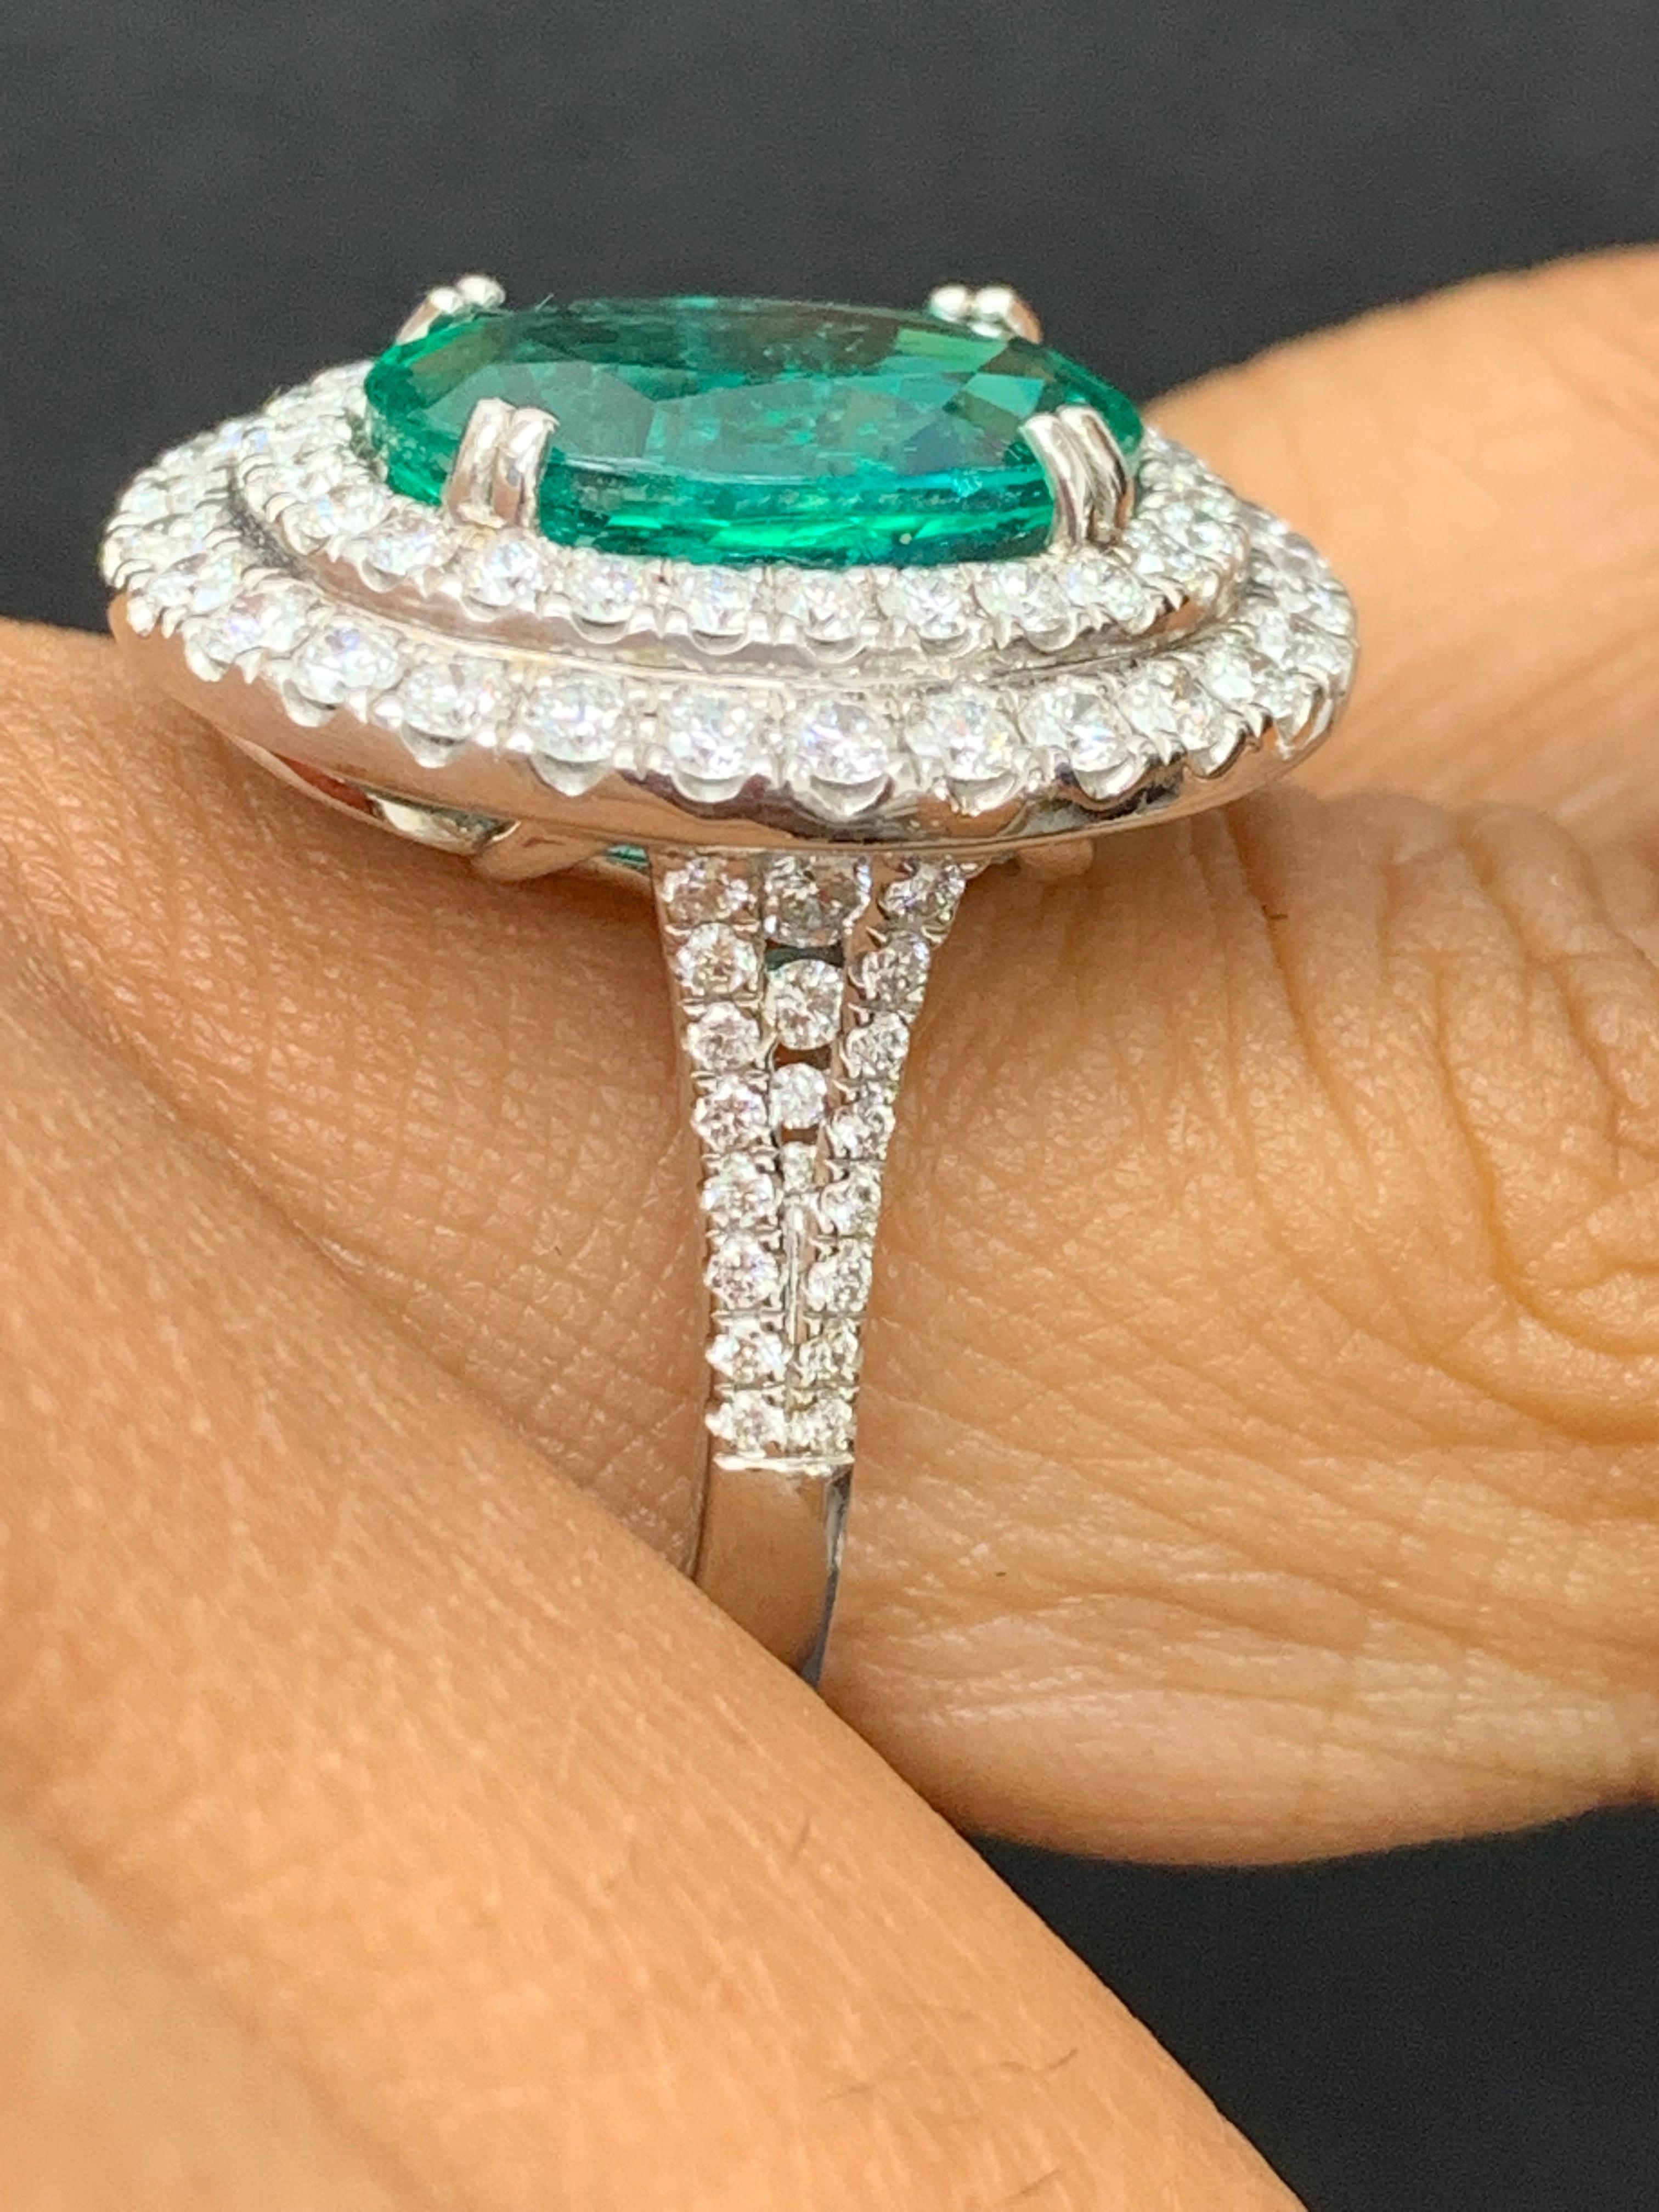 4.13 Carat Oval Cut Emerald and Diamond Engagement Ring in 18K White Gold For Sale 9